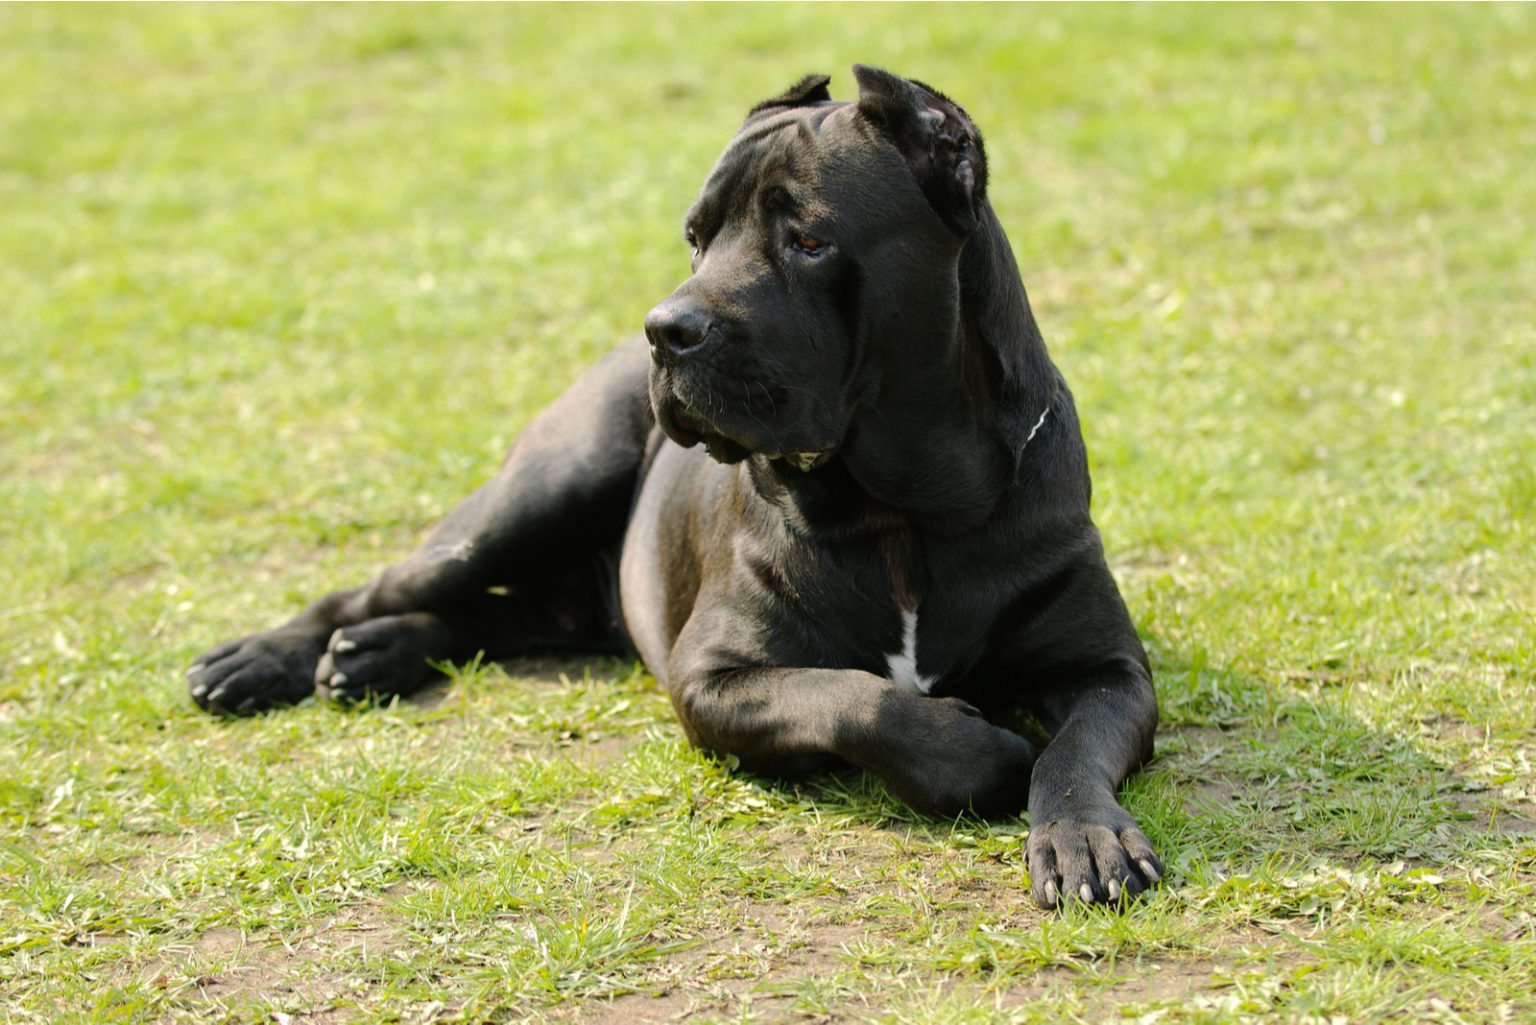 How Much Does A Cane Corso Cost? Are These Dogs Expensive?